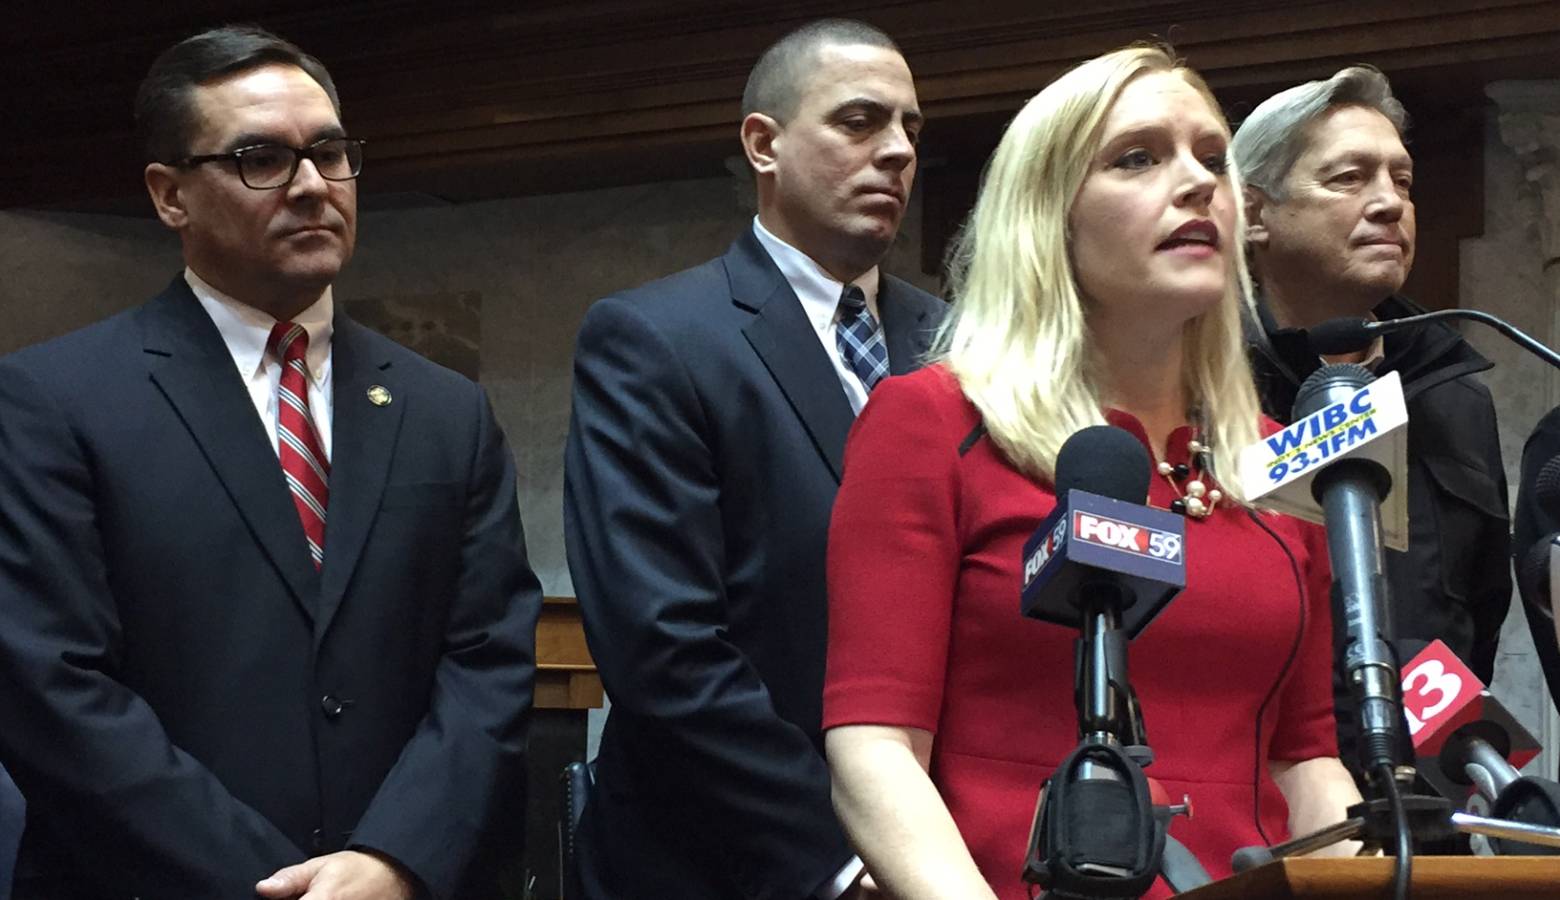 Sen. Erin Houchin (R-Salem) is surrounded by Indiana prosecutors when she announces in 2016 she'll author the felony arrestee DNA bill. (Brandon Smith/IPB News)